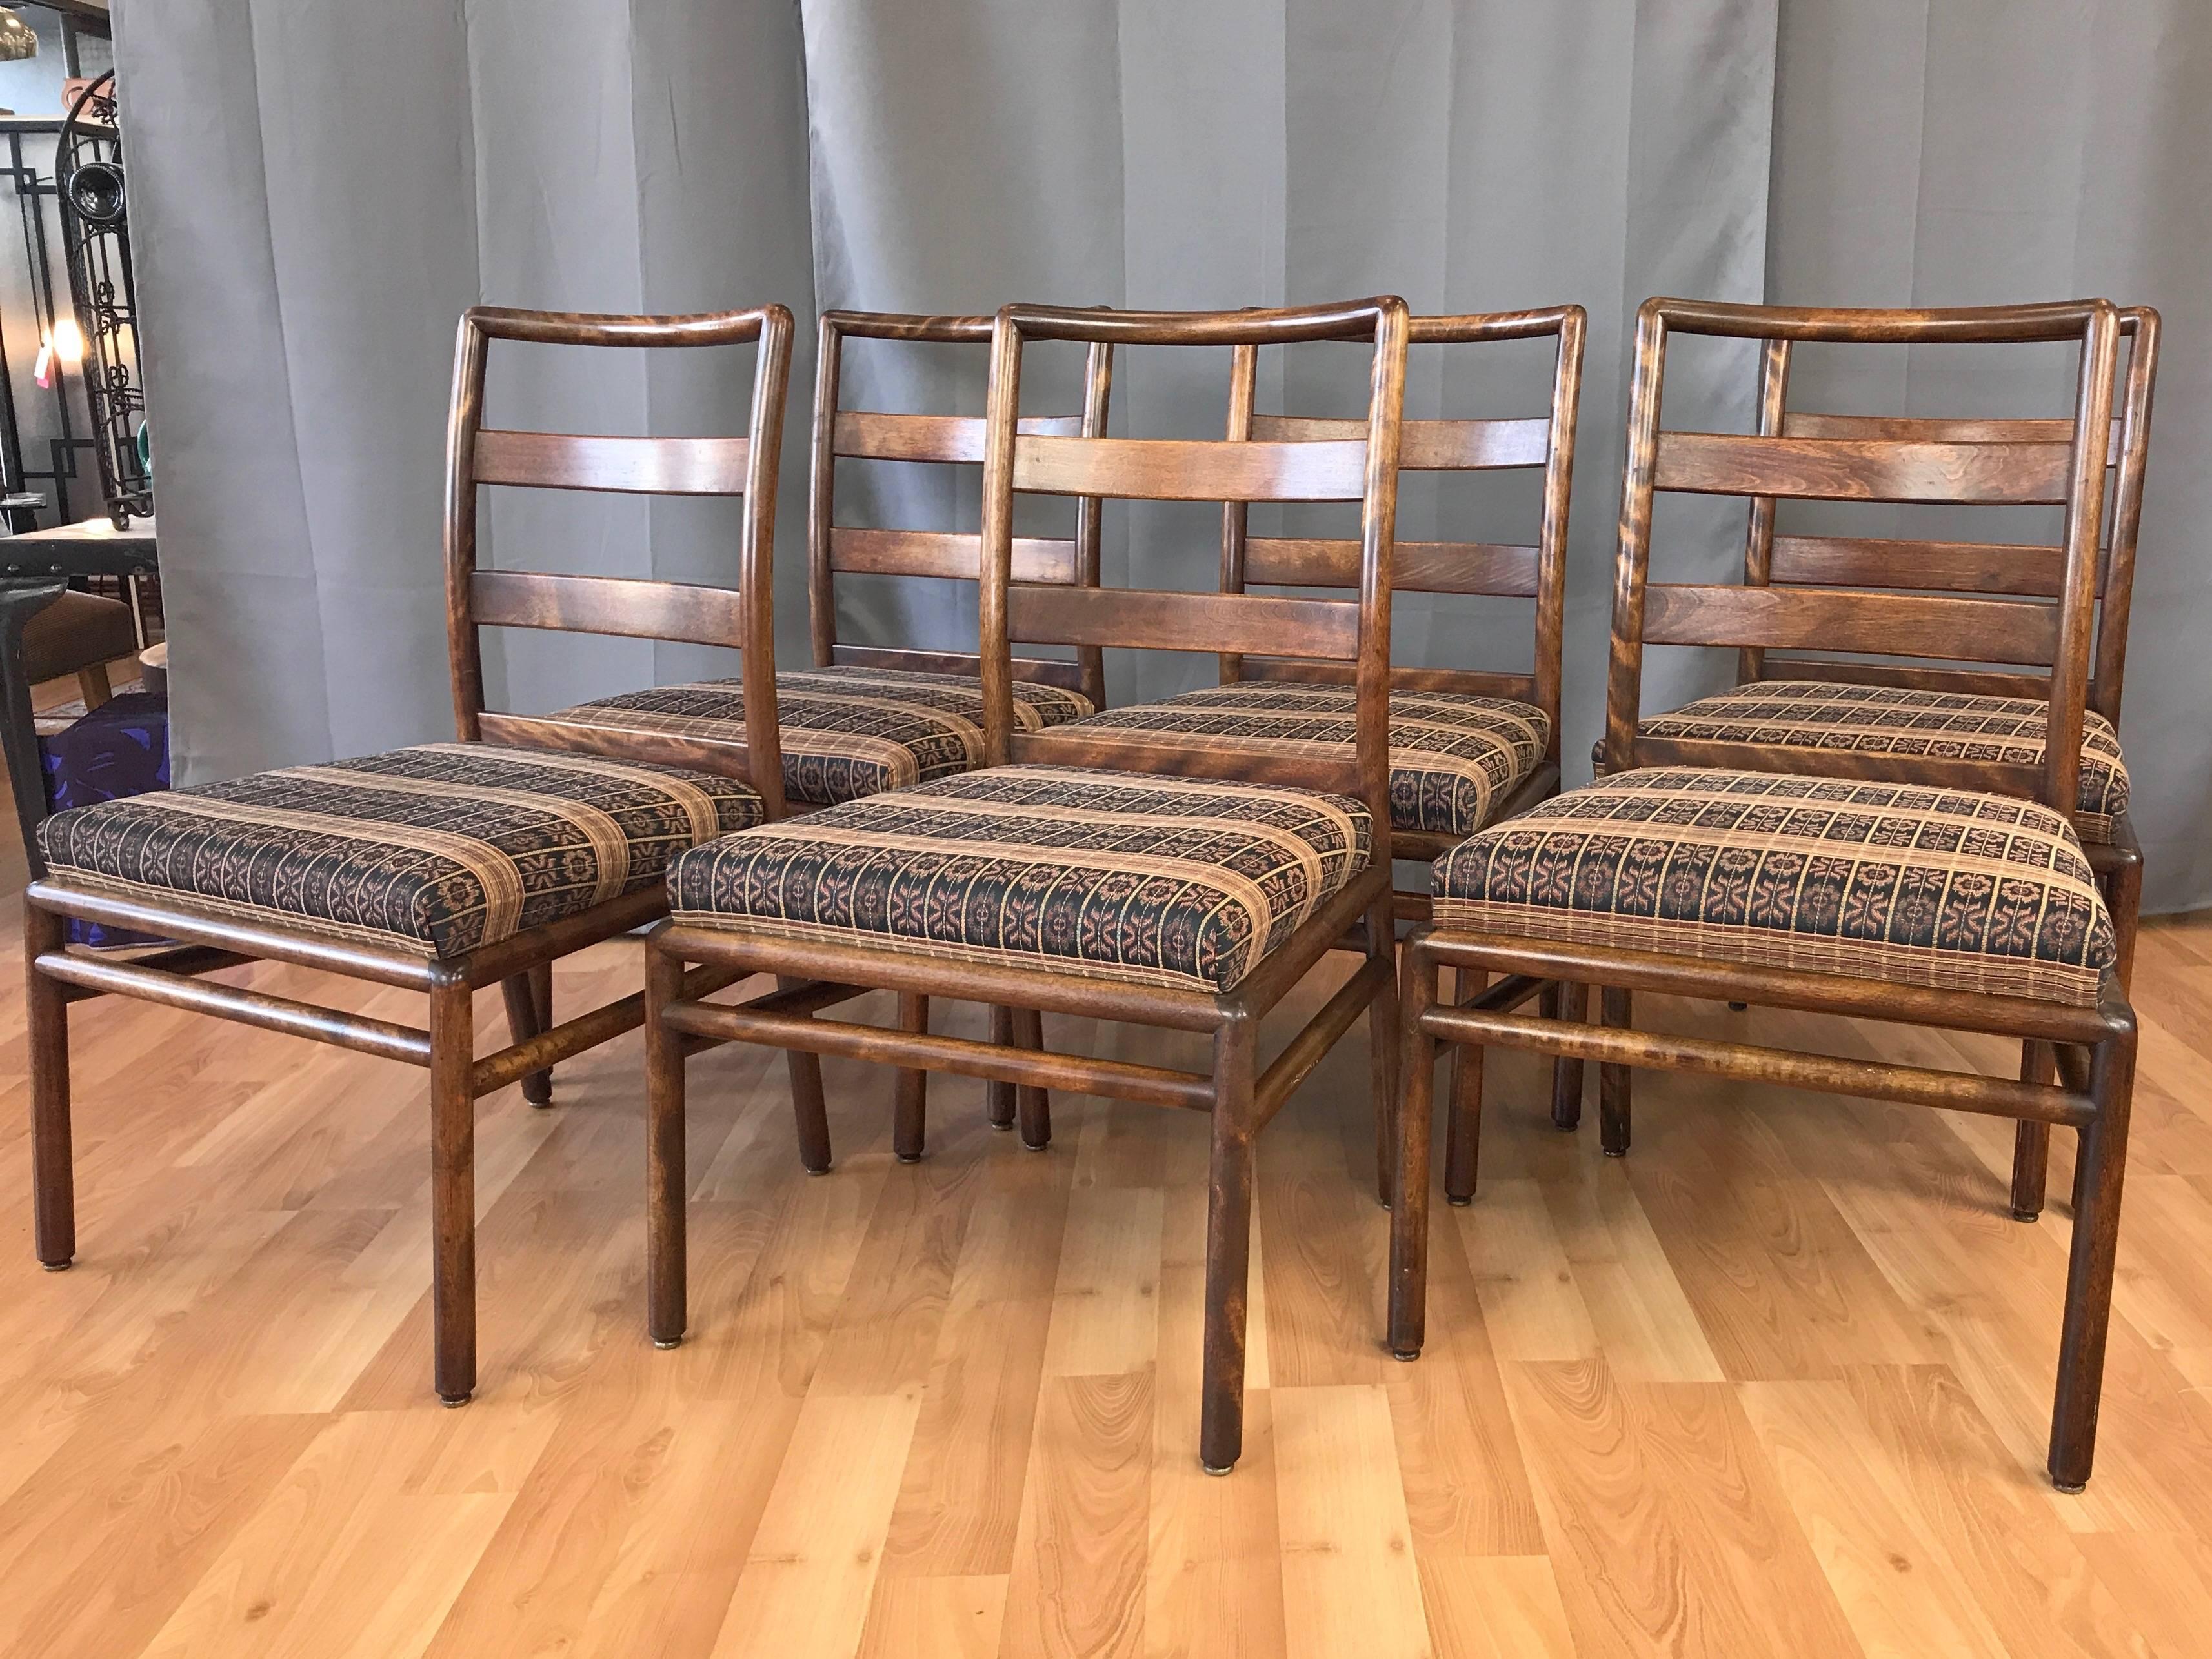 A six-piece set of very handsome midcentury ladder back dining chairs in maple by T.H. Robsjohn-Gibbings for Widdicomb Furniture Co.

Rounded and comfortable solid maple frame has a warm hickory stained finish that highlights the lively, shimmering